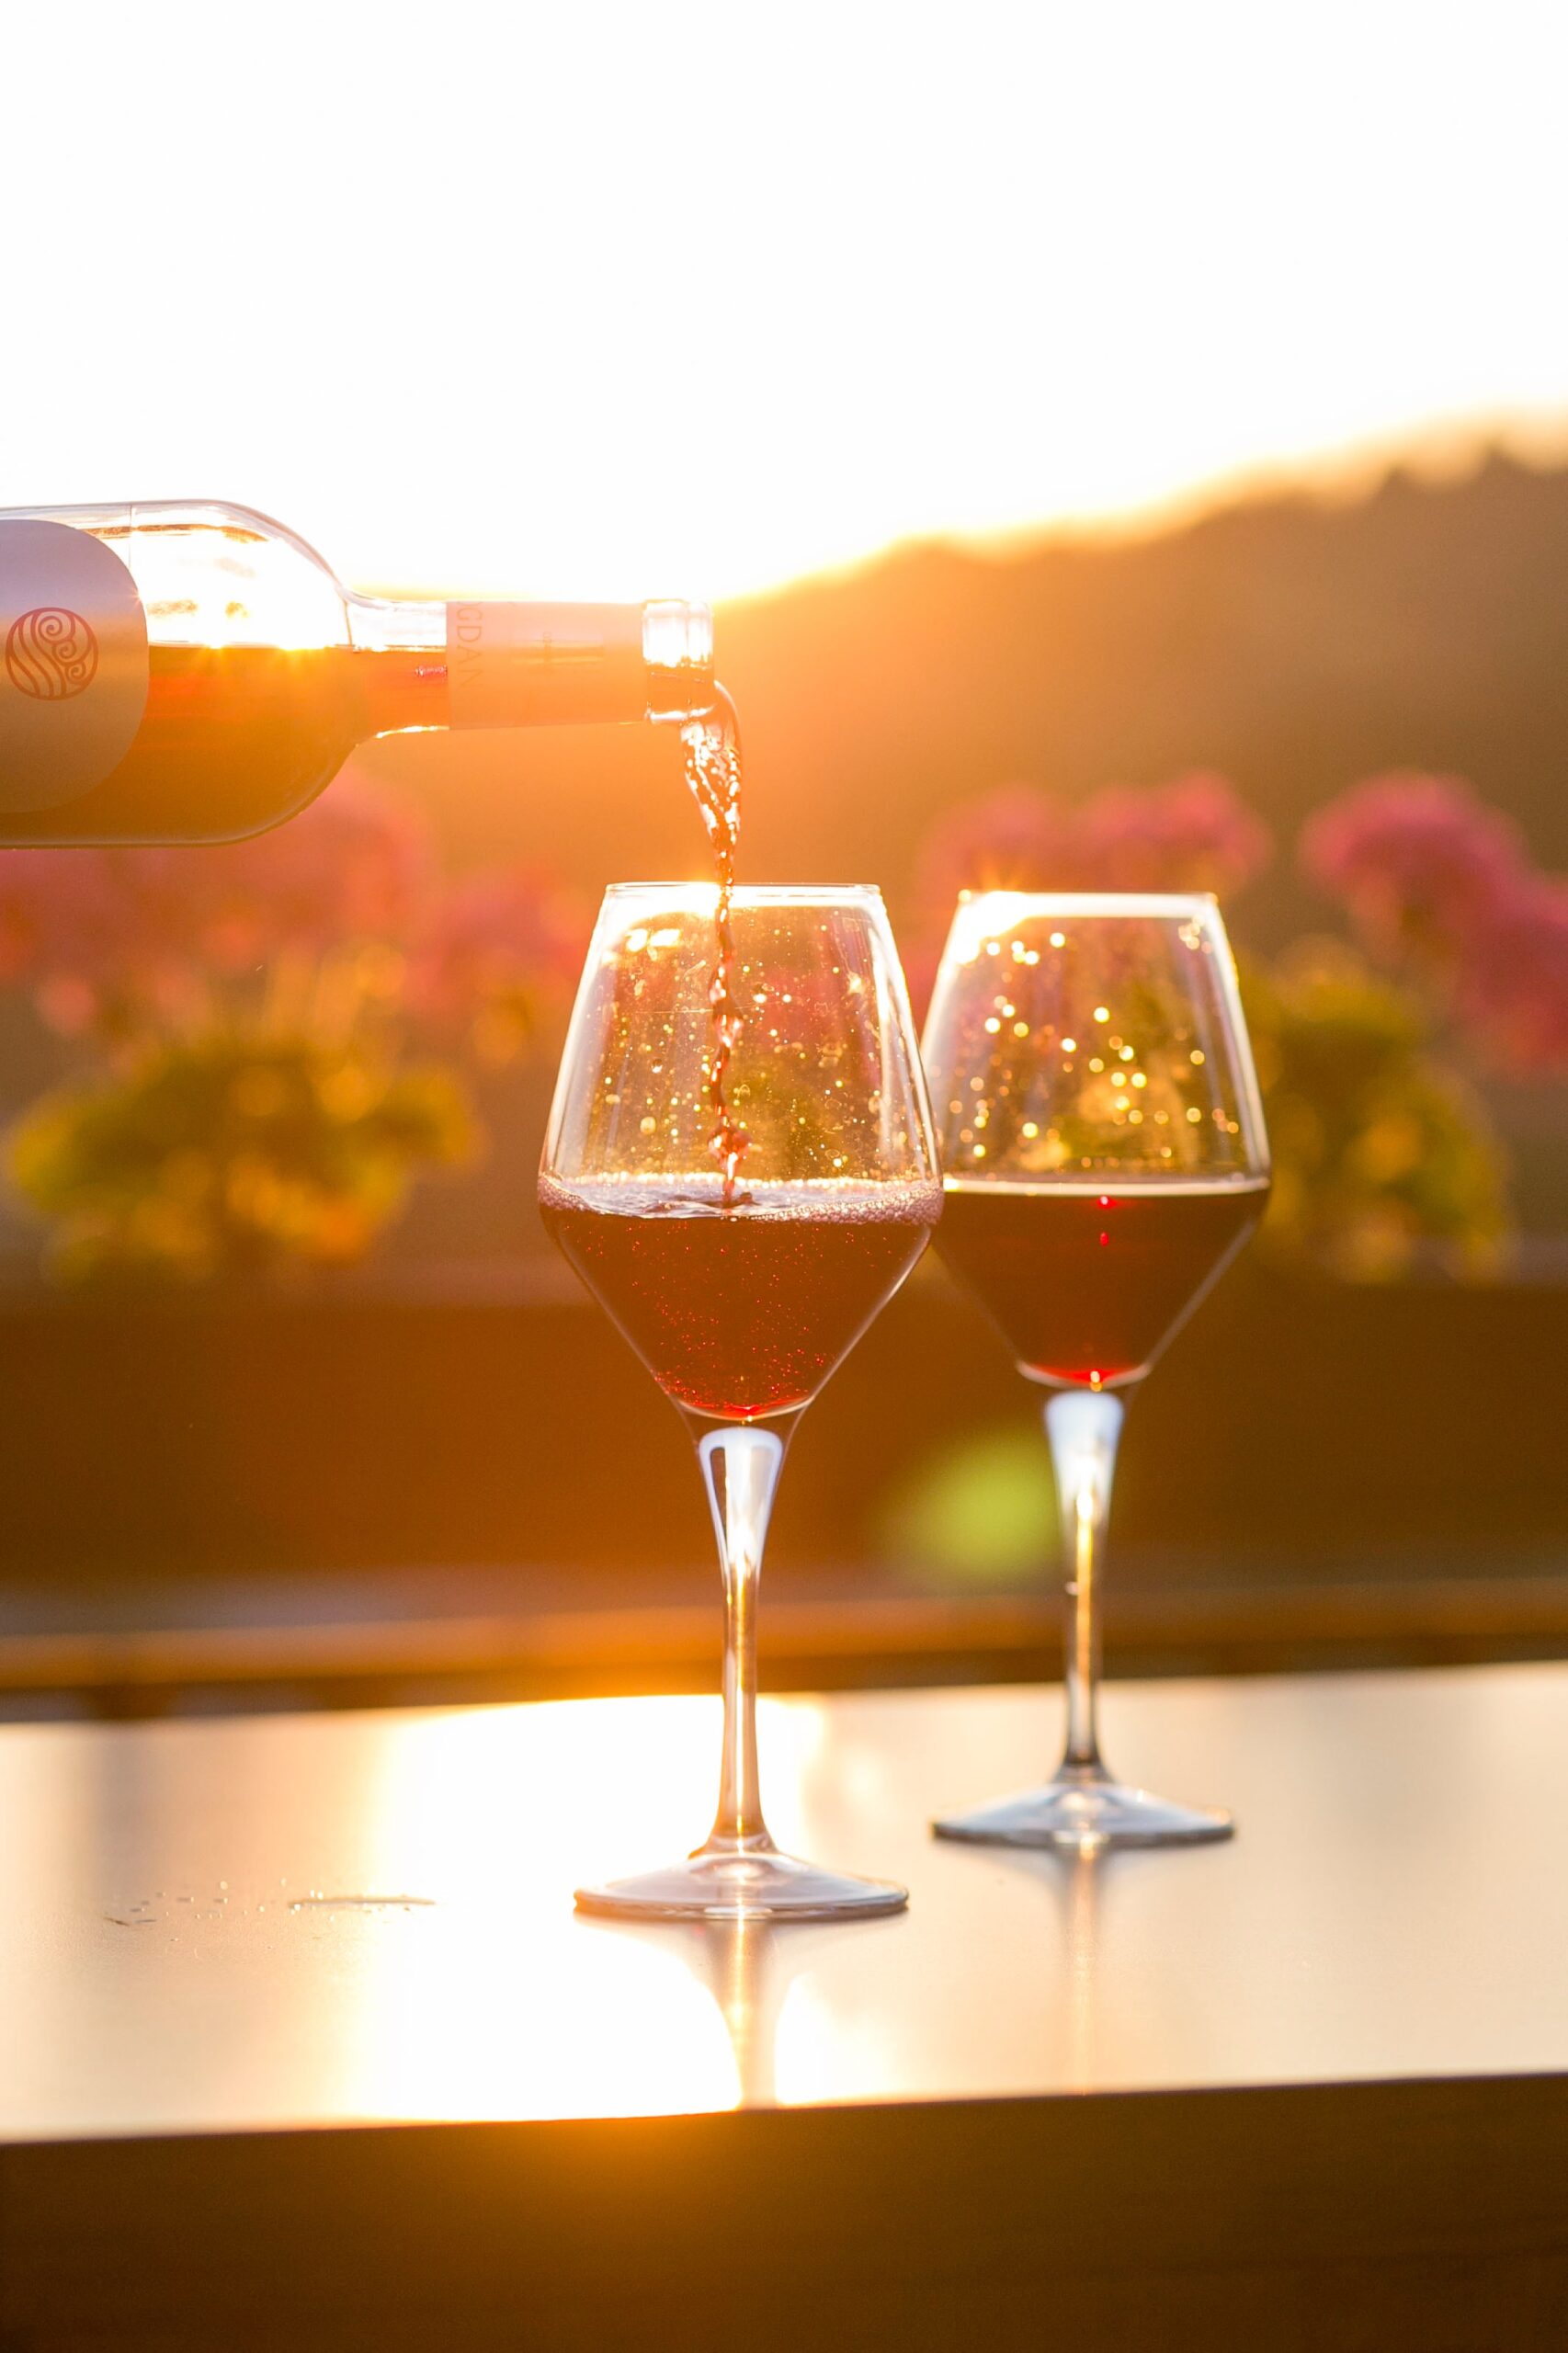 Pouring a glass of wine as the sun sets